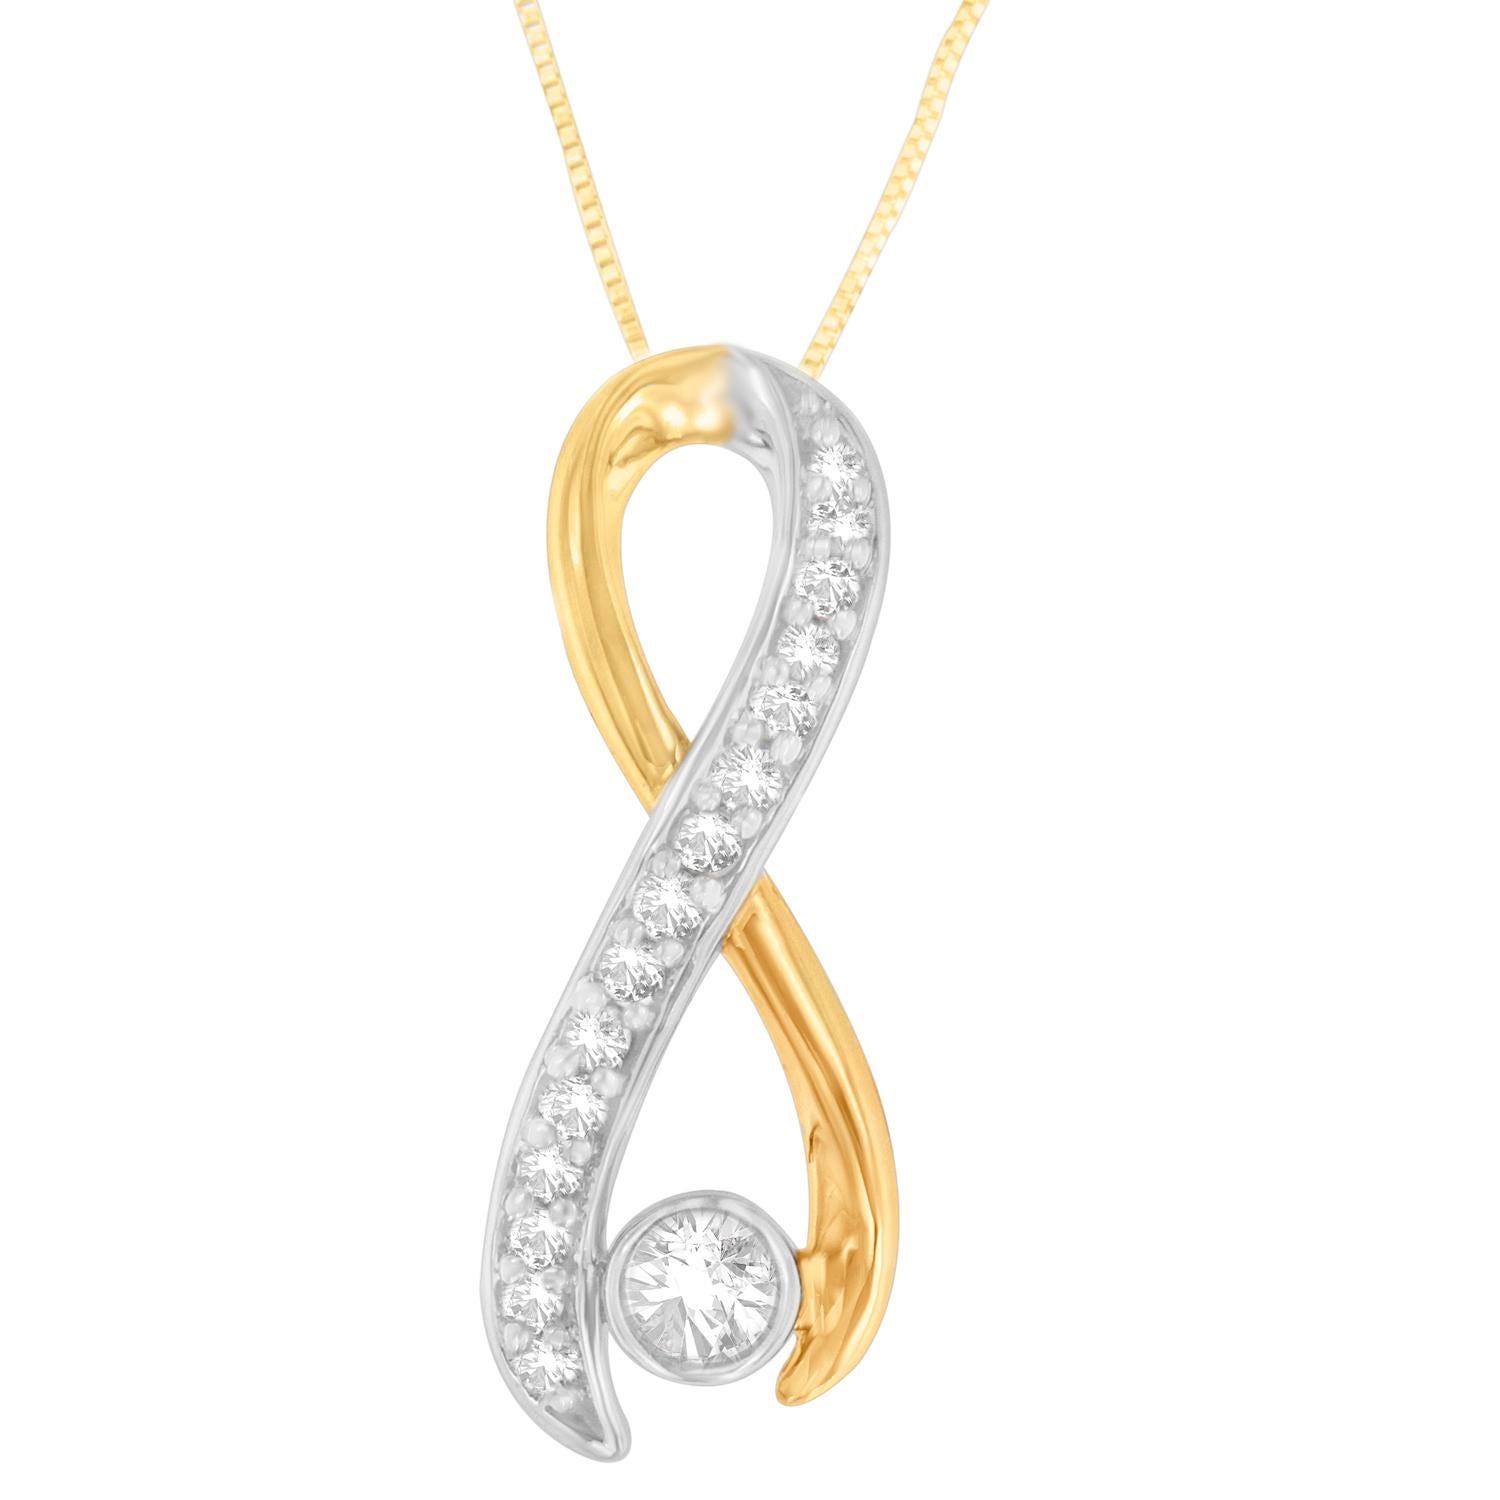 Timeless yellow gold cascades around a swirl of diamond-embellished white gold to create a sparkling spiral shape connected by a single round stone at the bottom. With style and elegance, this pendant necklace is a must for every woman with